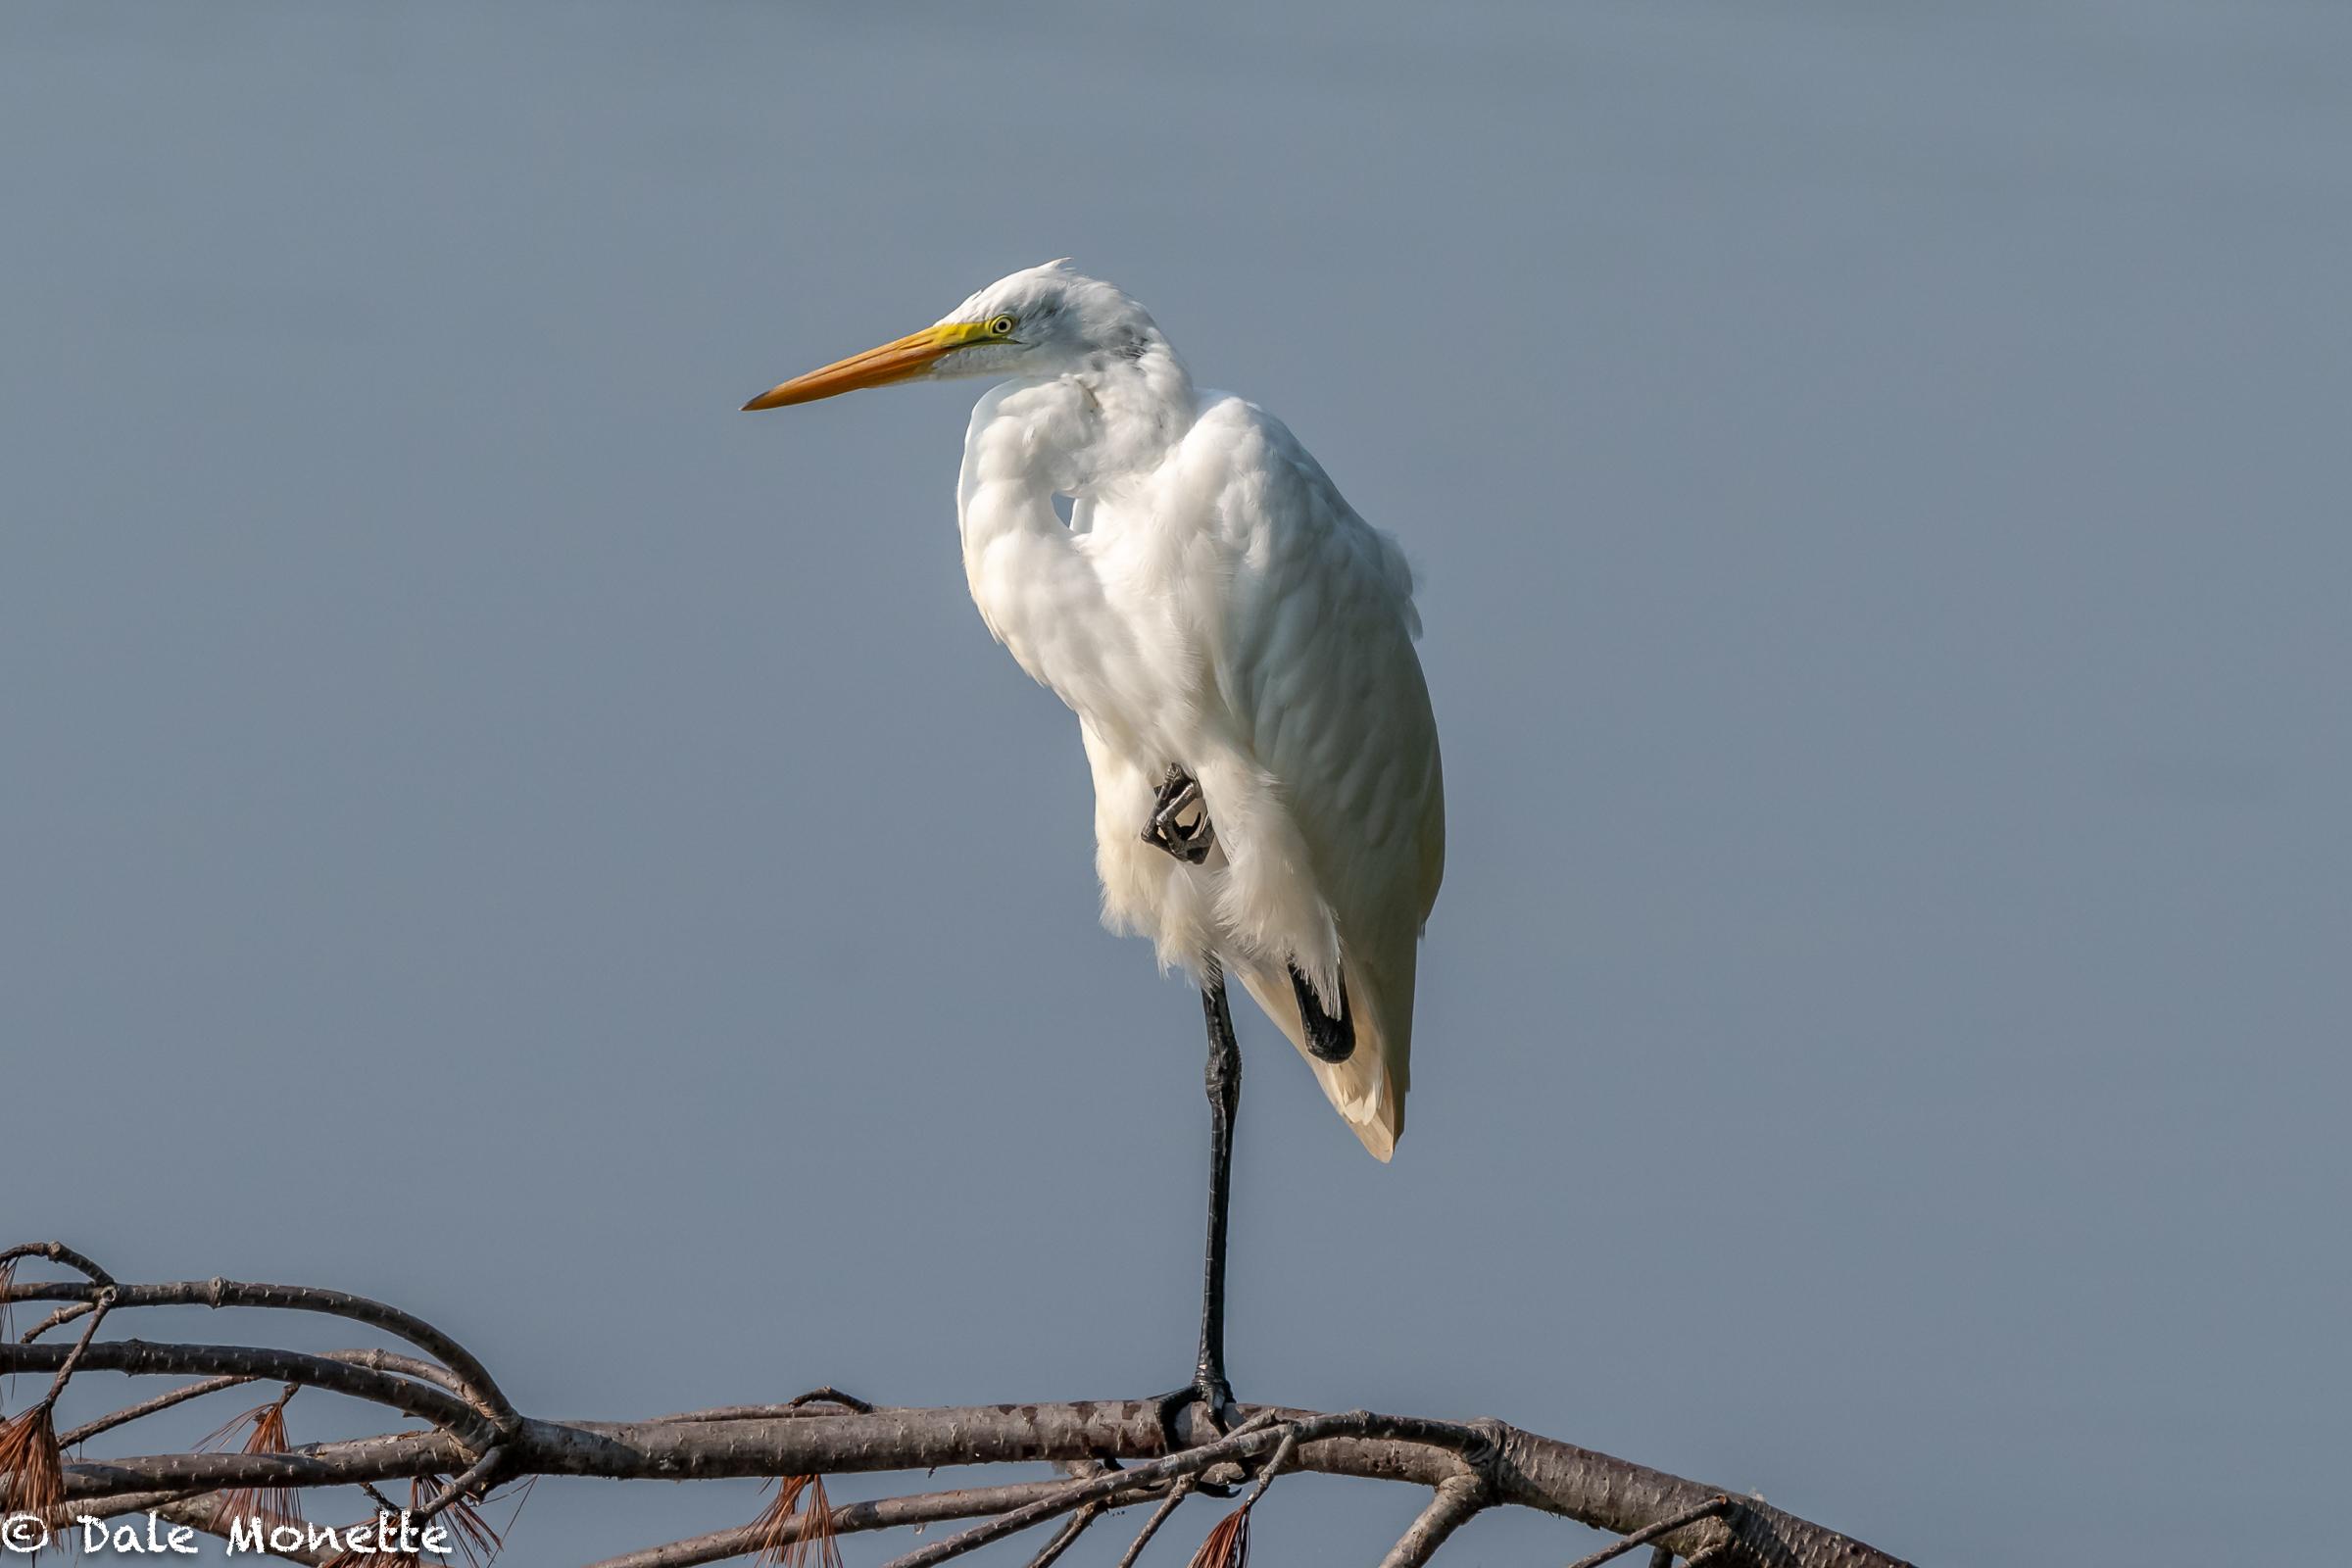   It won’t be long before these great egrets are heading south for the winter.  The show up each year from the coast between July and August, then all leave as quickly as they arrive.  